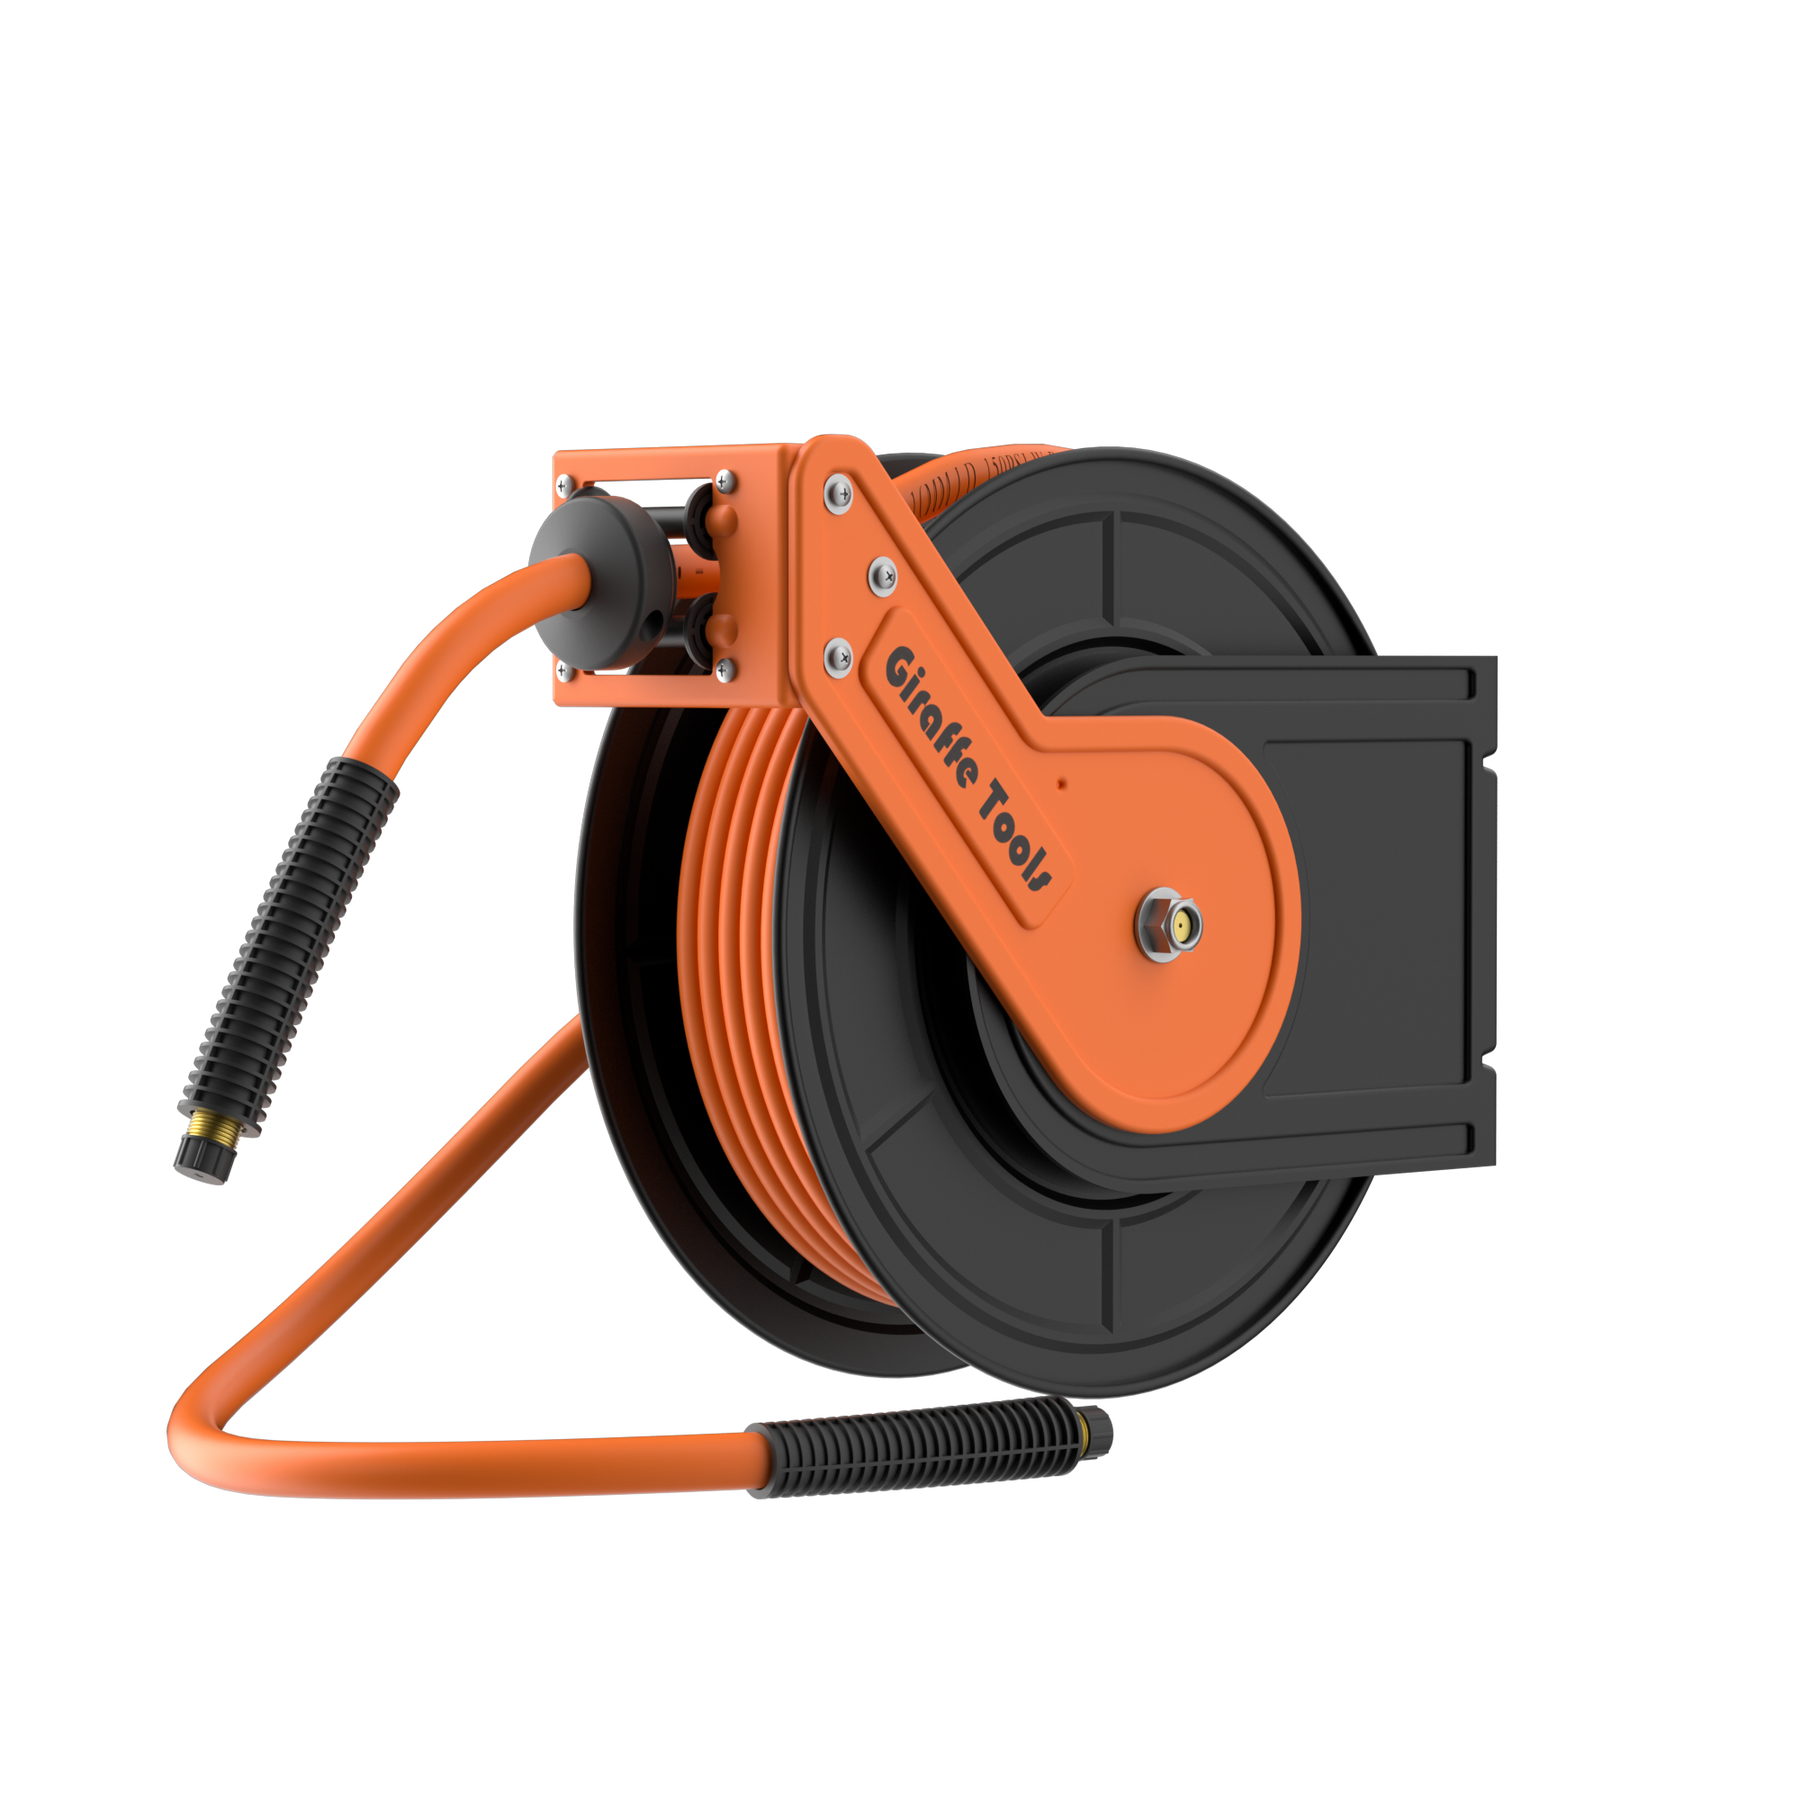 300 PSI Retractable Air Hose Reel with 3/8 Inch x 50Ft Hose Auto Rewind